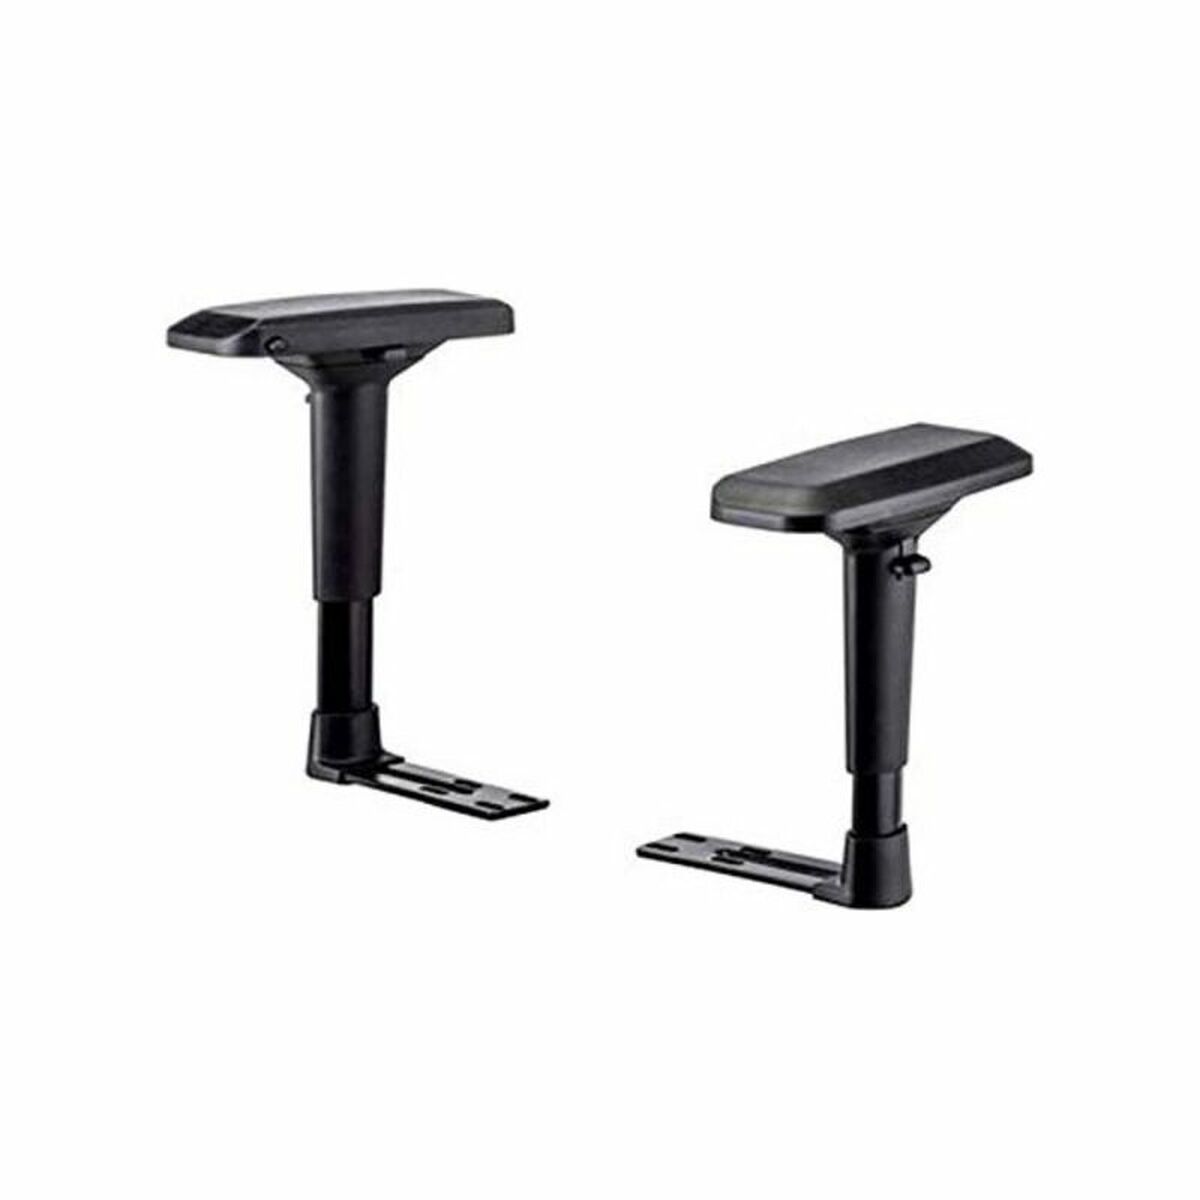 Arms for Gaming/Desk Chair Sparco 10801 (2 pcs) - Generation Gamer